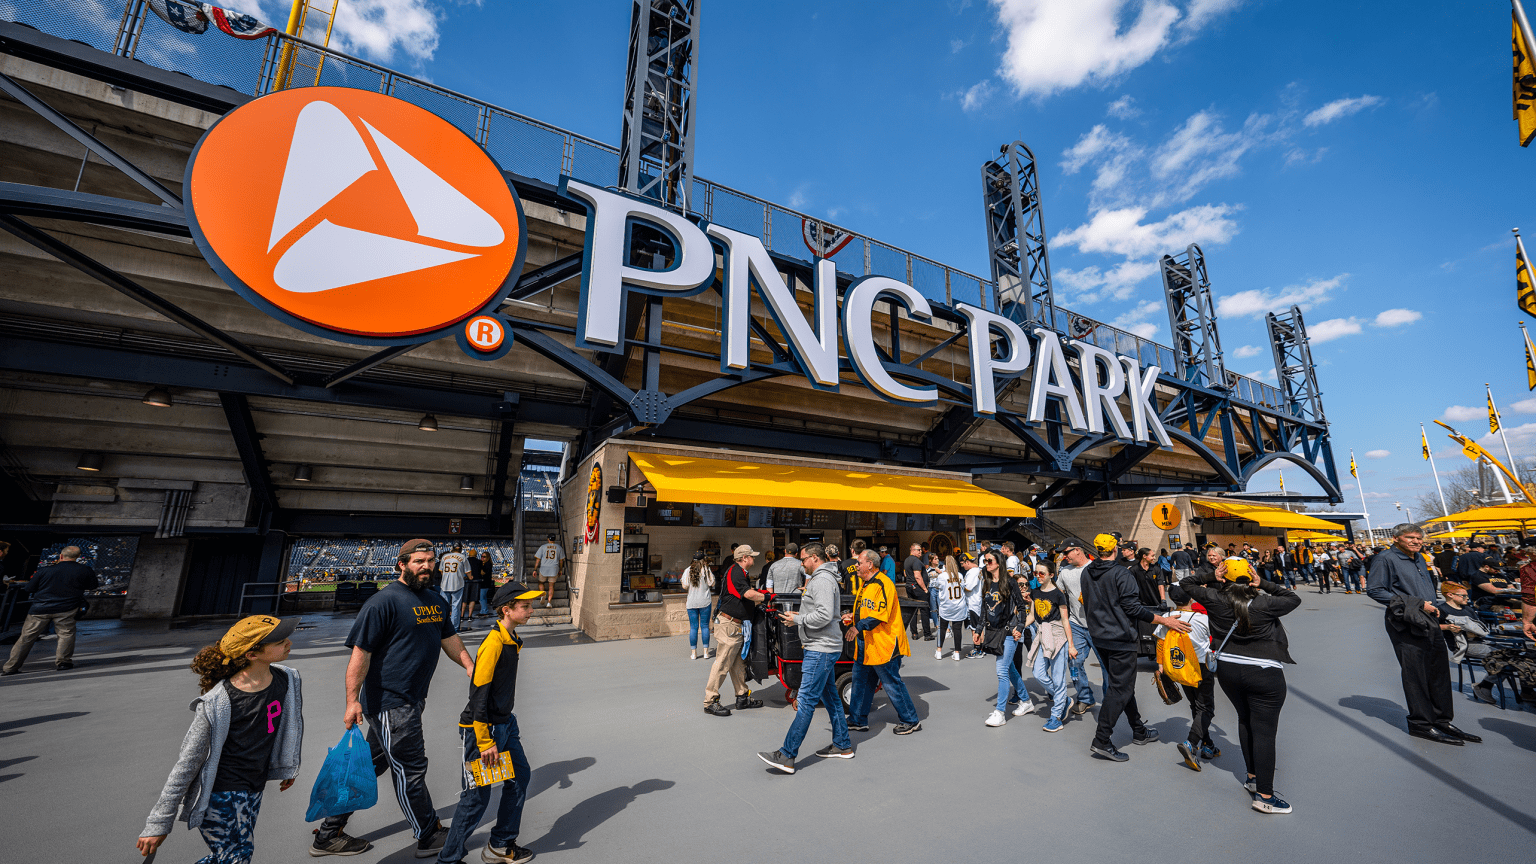 Pirates to spend $11 million to expand retail store, upgrade concession  stands at PNC Park